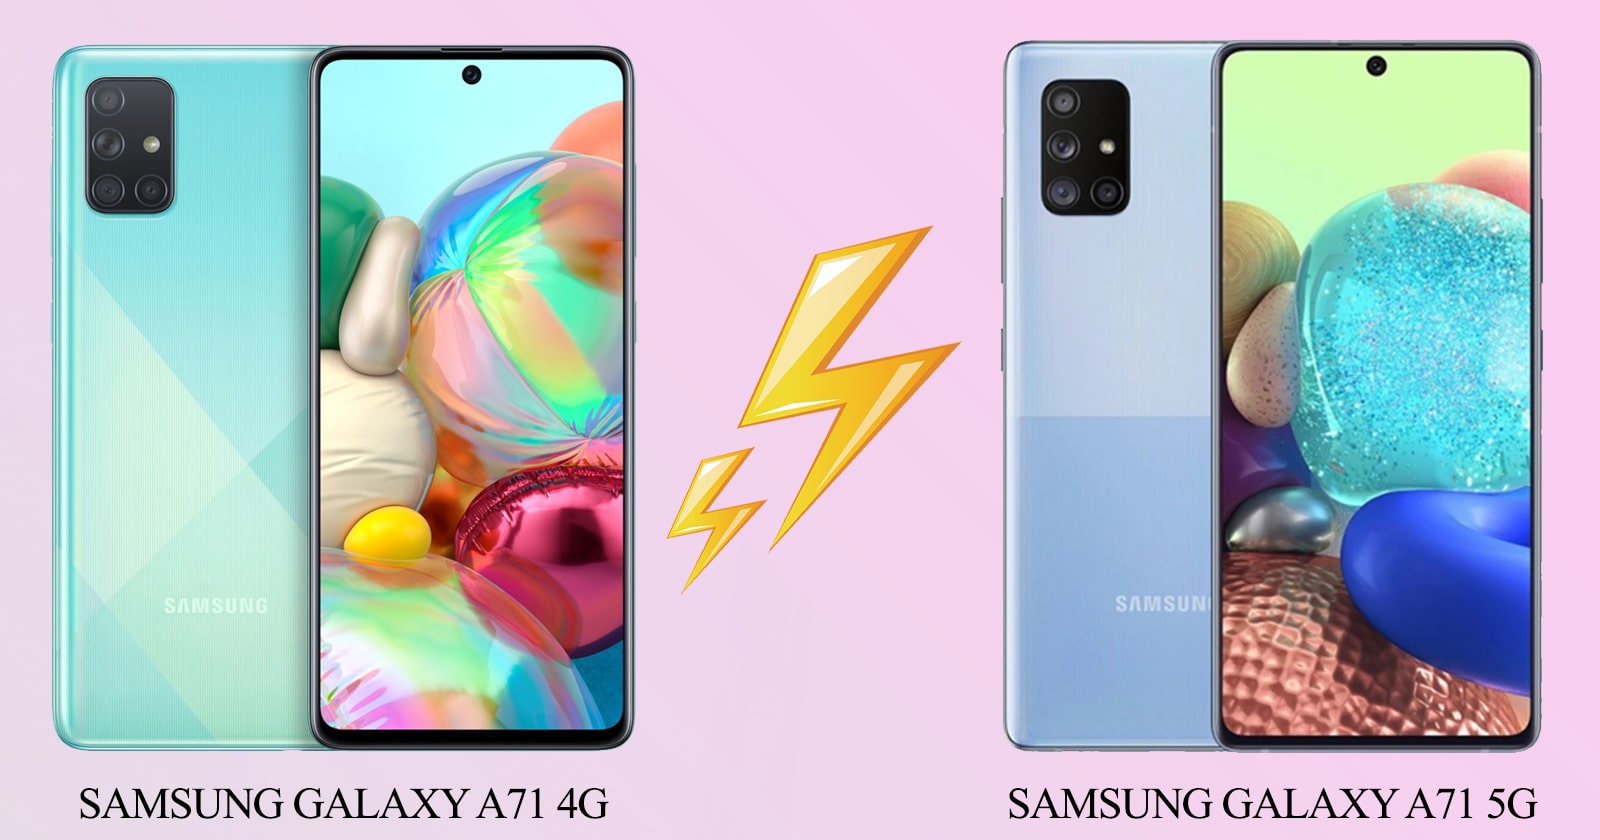 What Is the Difference Between Samsung Galaxy A71 4G and 5G